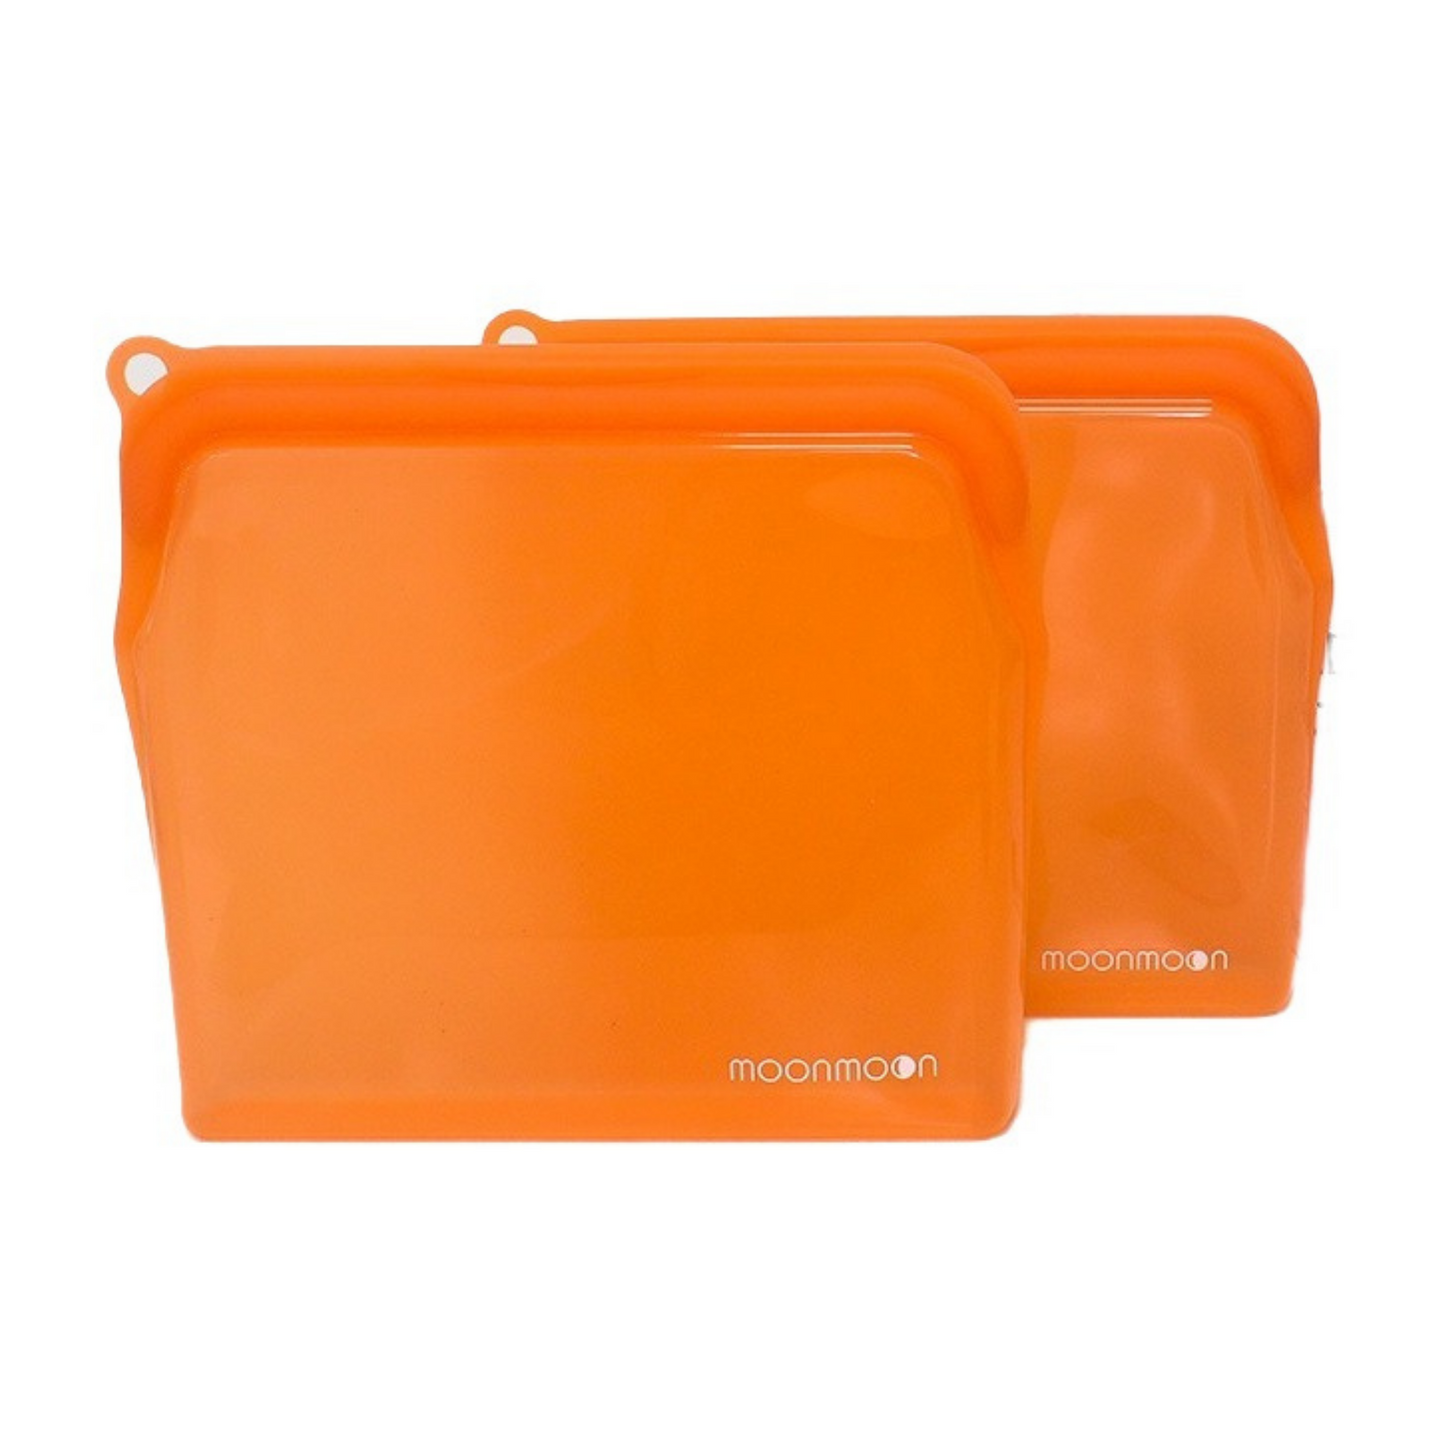 silicone bags uk reusable silicone freezer bags uk reusable silicone food bags uk reusable freezer bags silicone silicone ziplock bags uk reusable silicone pouches best silicone freezer bags uk silicone food bags dishwasher safe best reusable silicone bags (uk) silicone freezer bag, stasher bags